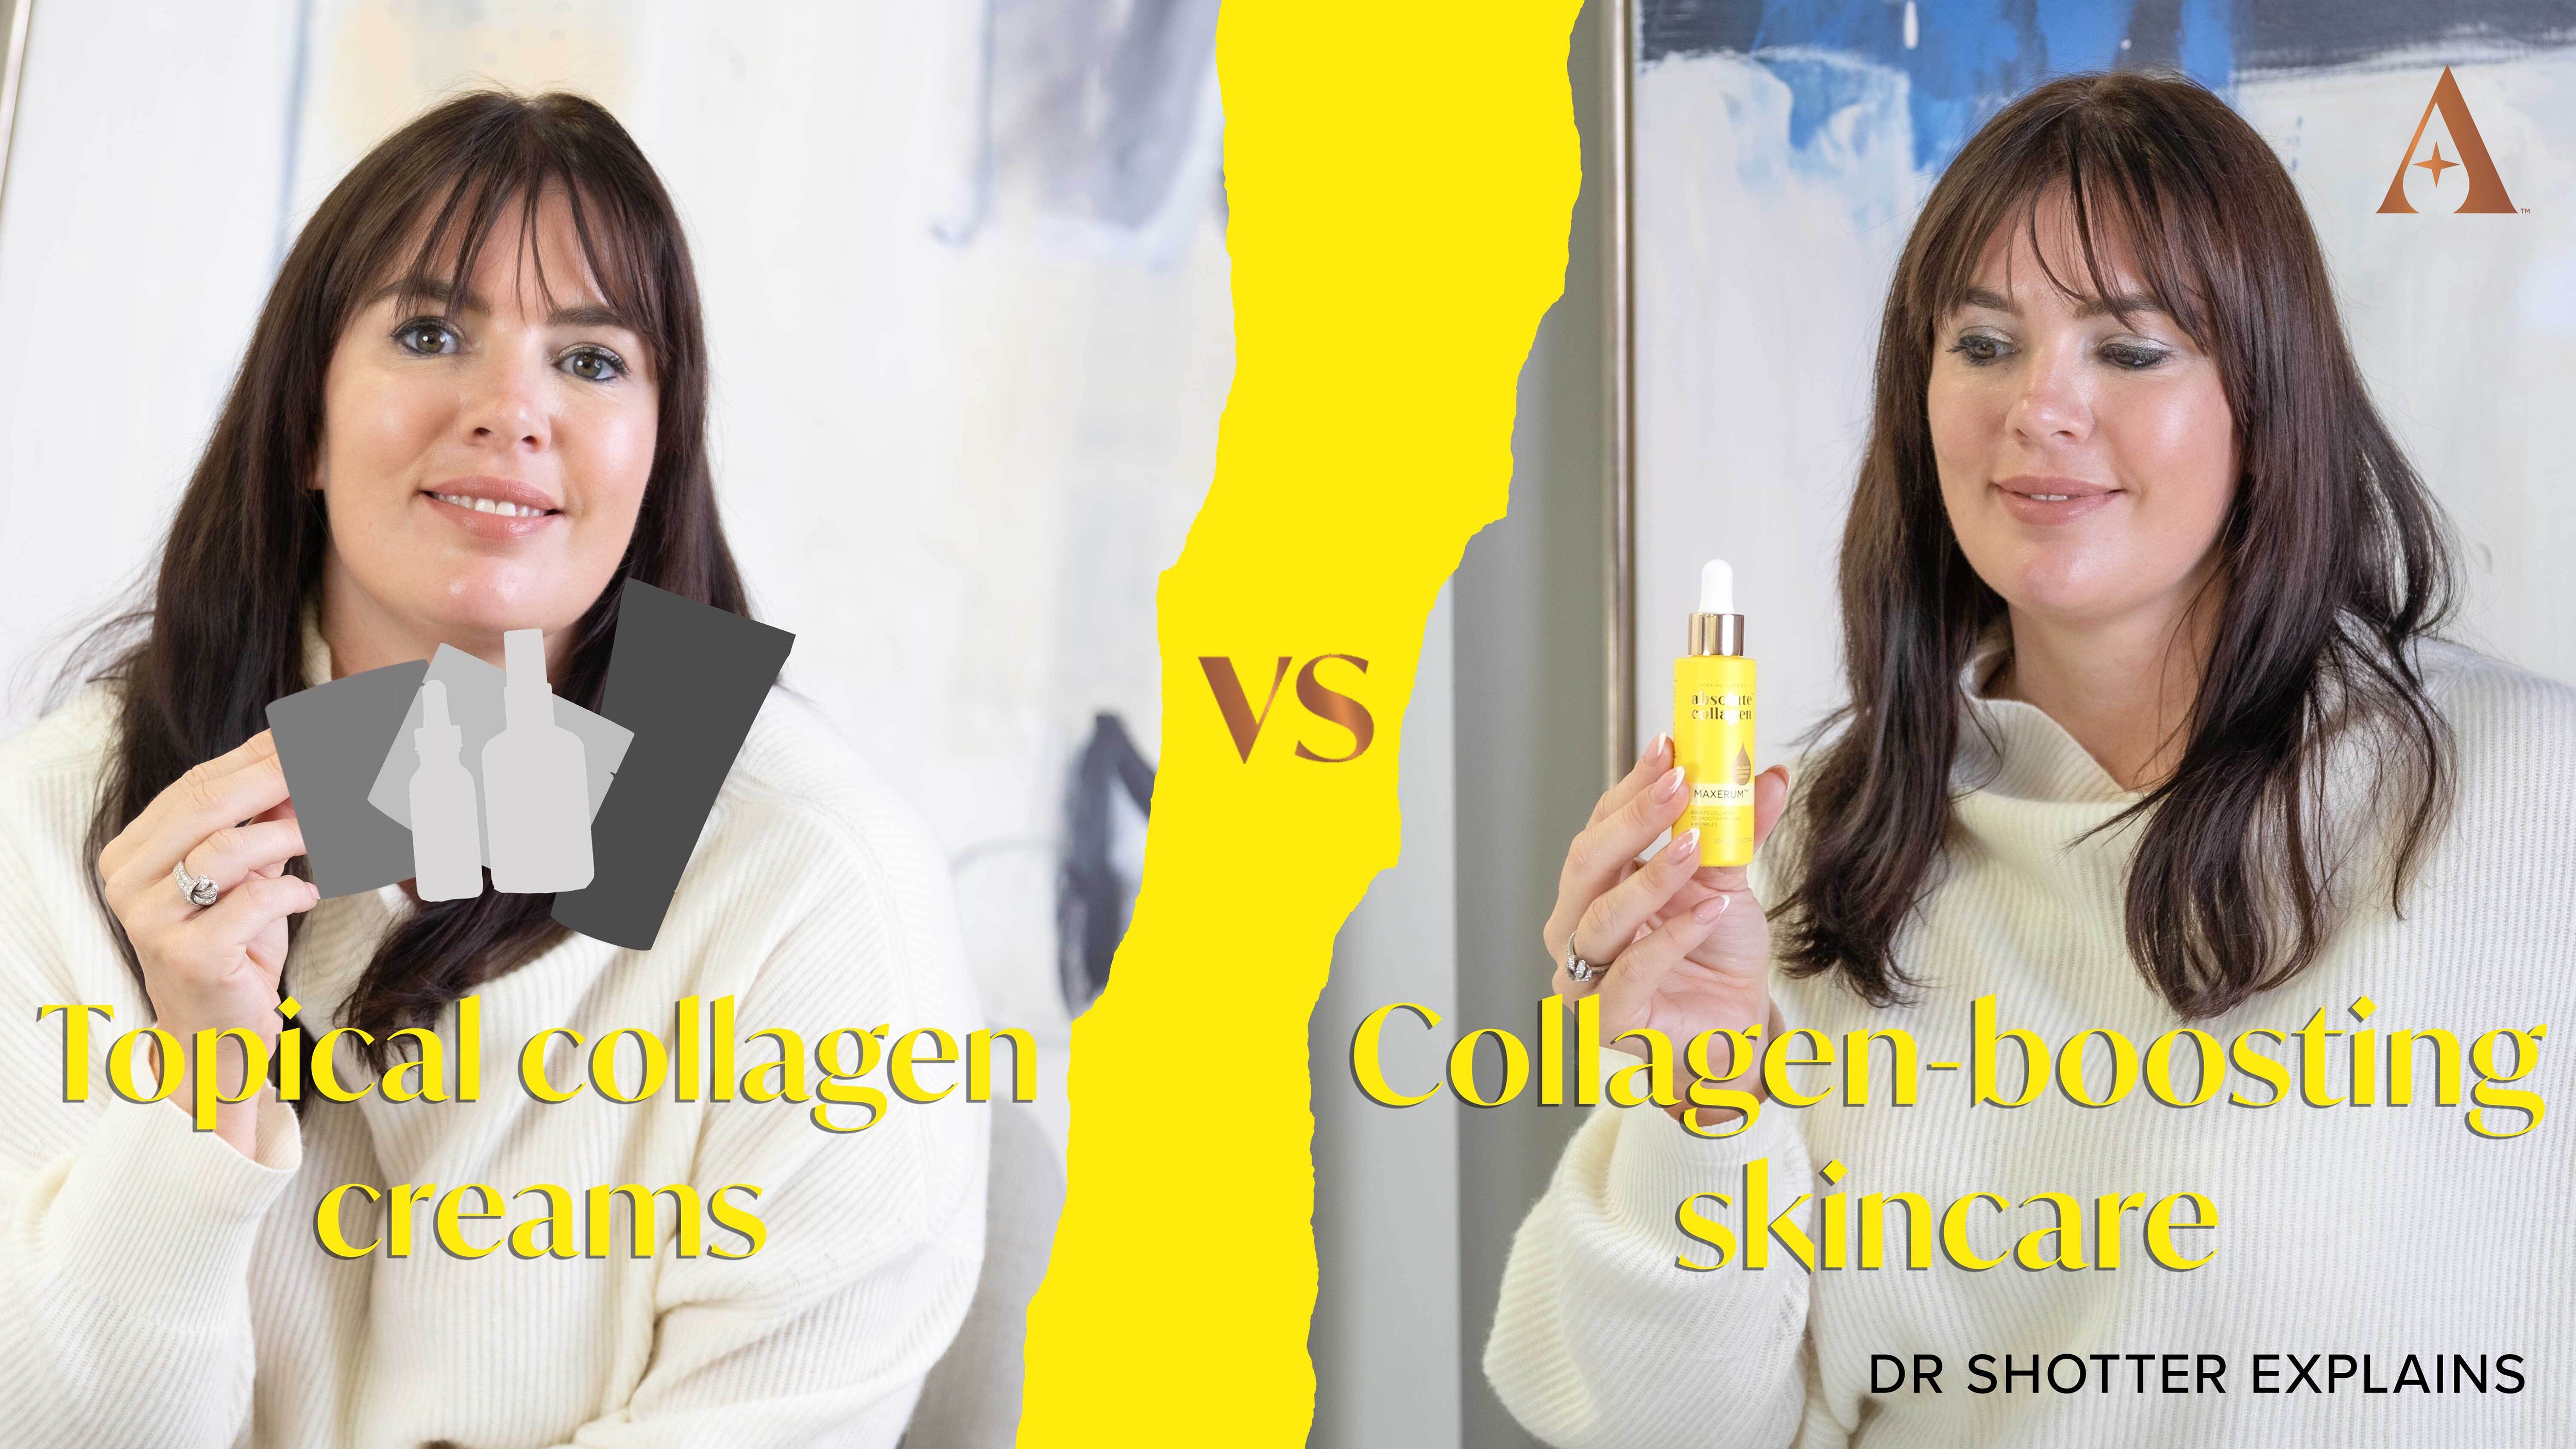 We’re here with our resident skincare expert, Dr Sophie Shotter, to answer the golden question - does collagen skincare really work?